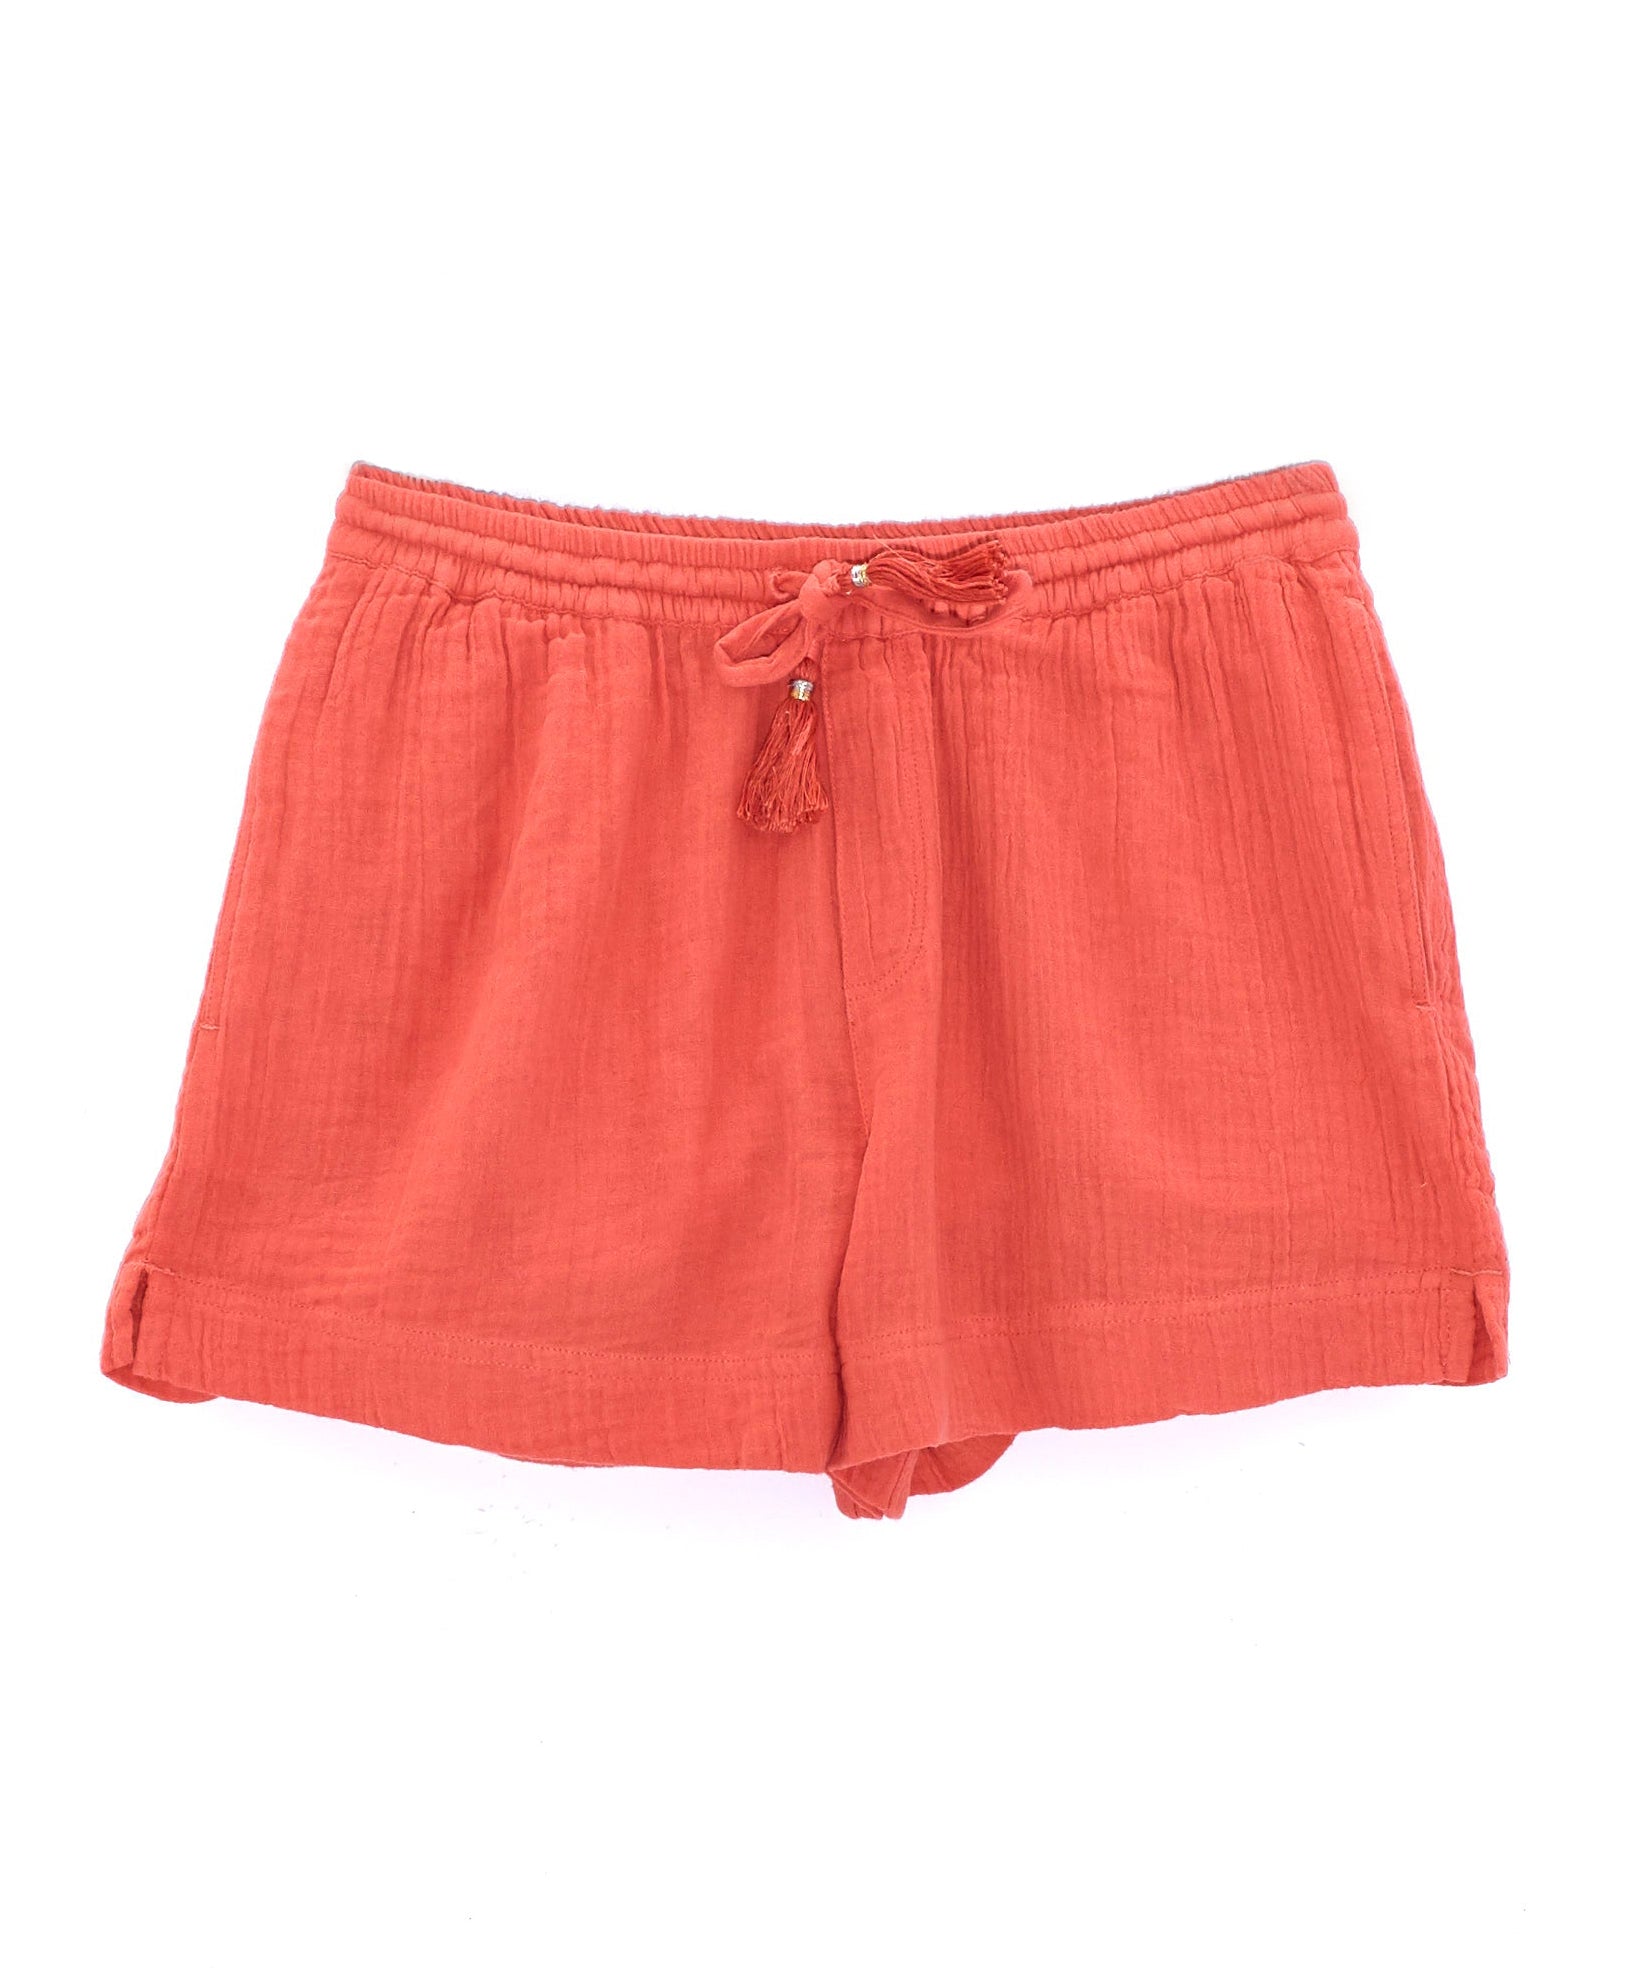 Double Gauze Beach Shorts in color Emberglow